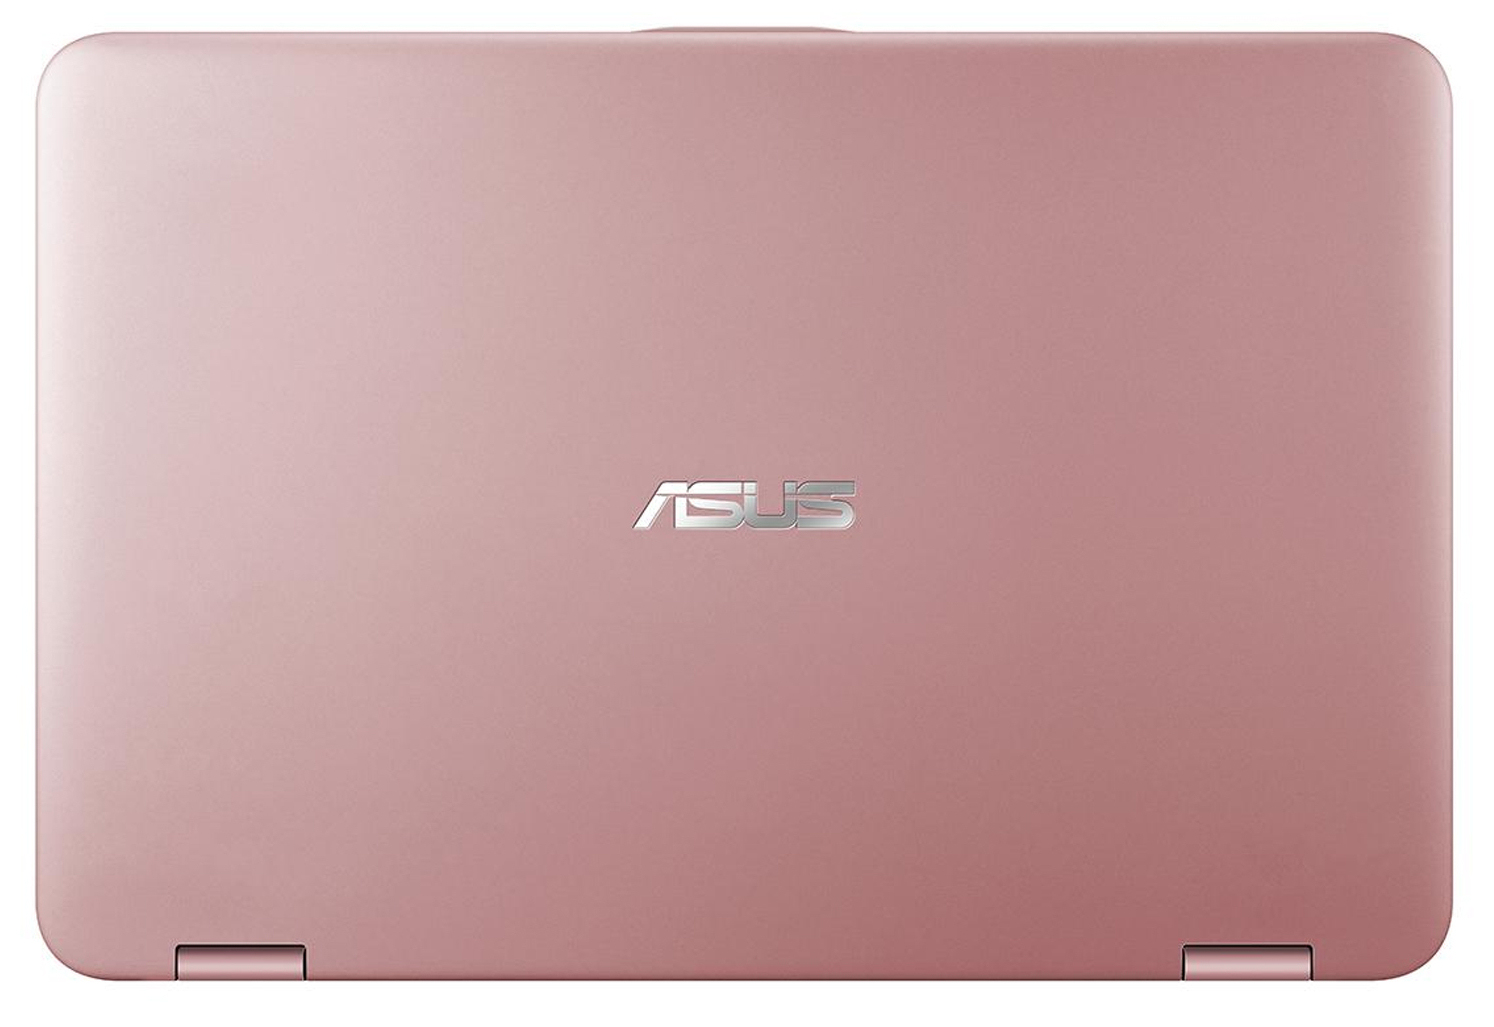 ASUS VivoBook Flip 12 (TP203) - Specs, Tests, and Prices